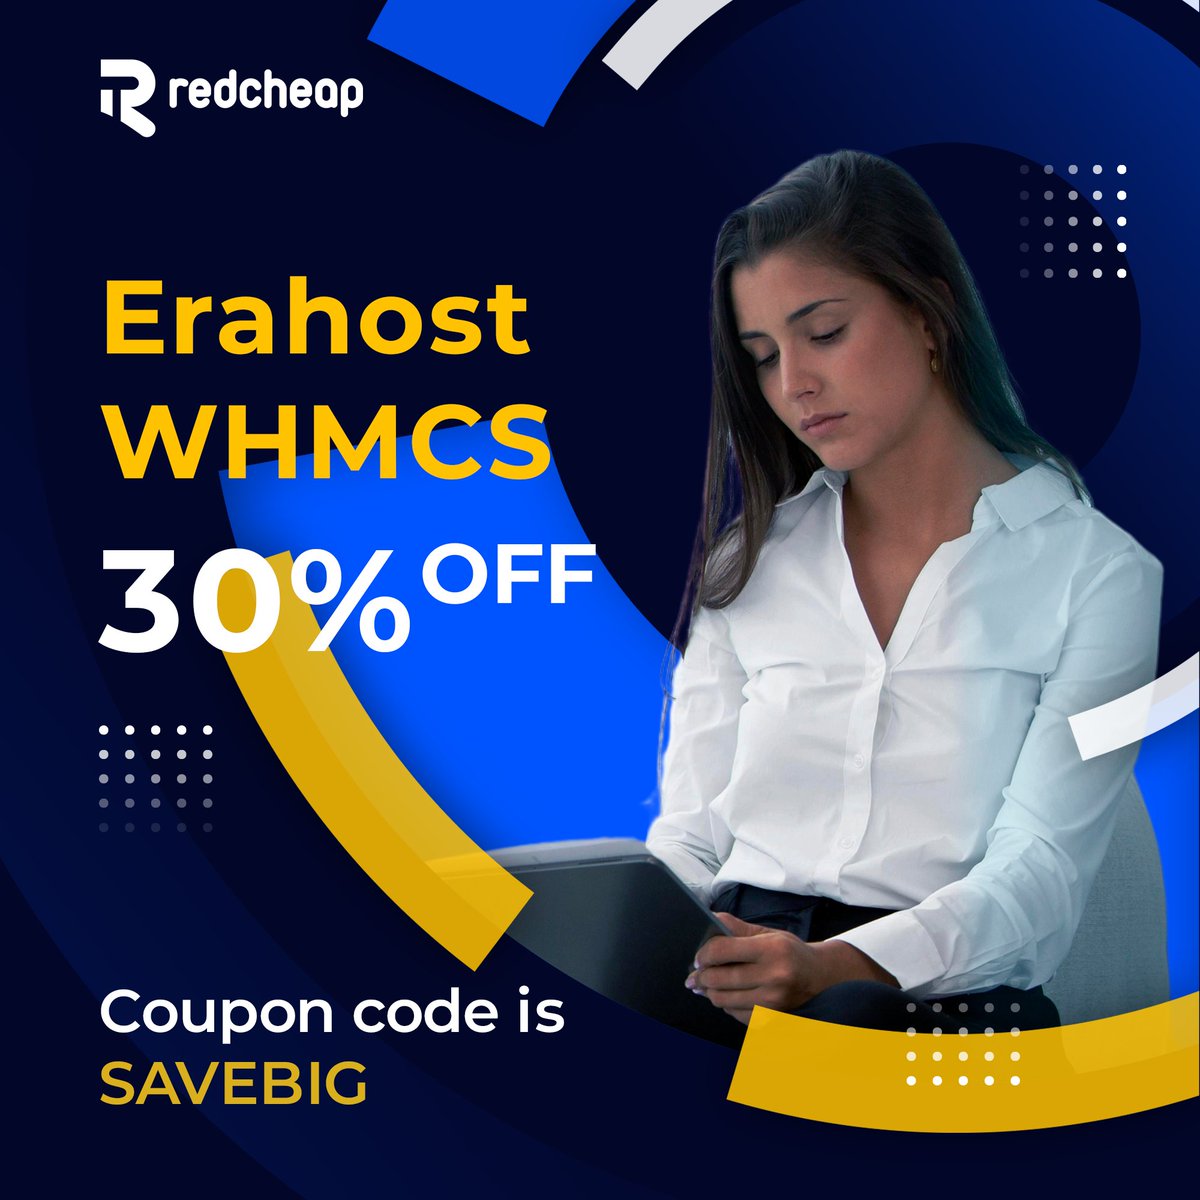 🎉 Exciting News! 🎉 Get your hands on the sleek Erahost WHMCS Theme now at an incredible 30% OFF! 💸 Use coupon code SAVEBIG and elevate your website's aesthetic effortlessly. Don't miss out on this exclusive offer! #WebHosting #WHMCS #Erahost #Discount #SaveBig